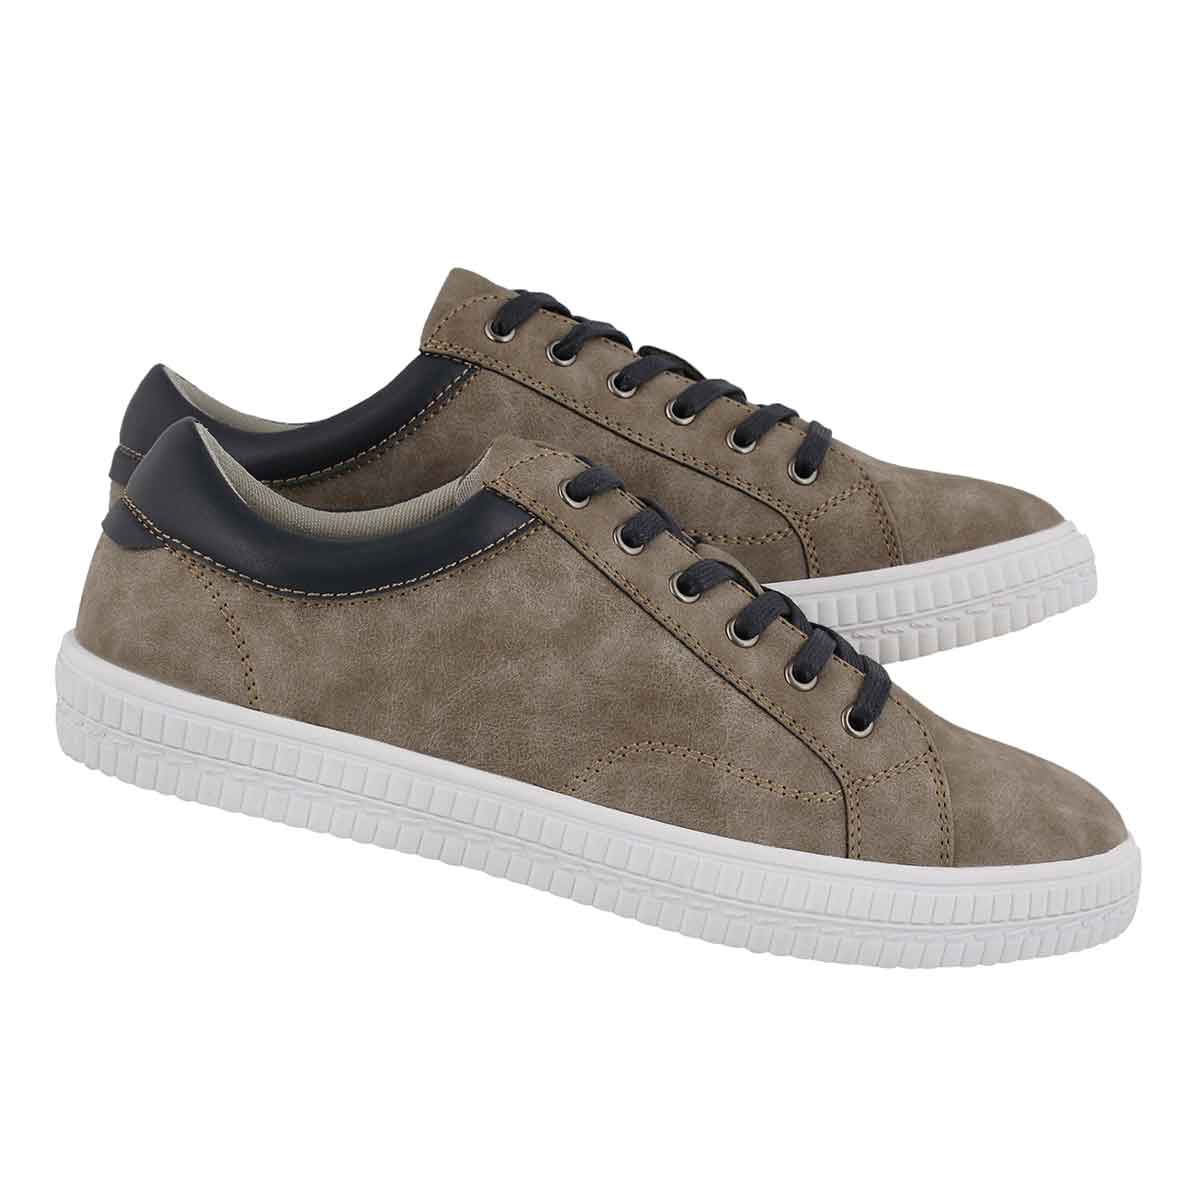 SoftMoc Men's JORGE taupe lace up sneakers | SoftMoc.com